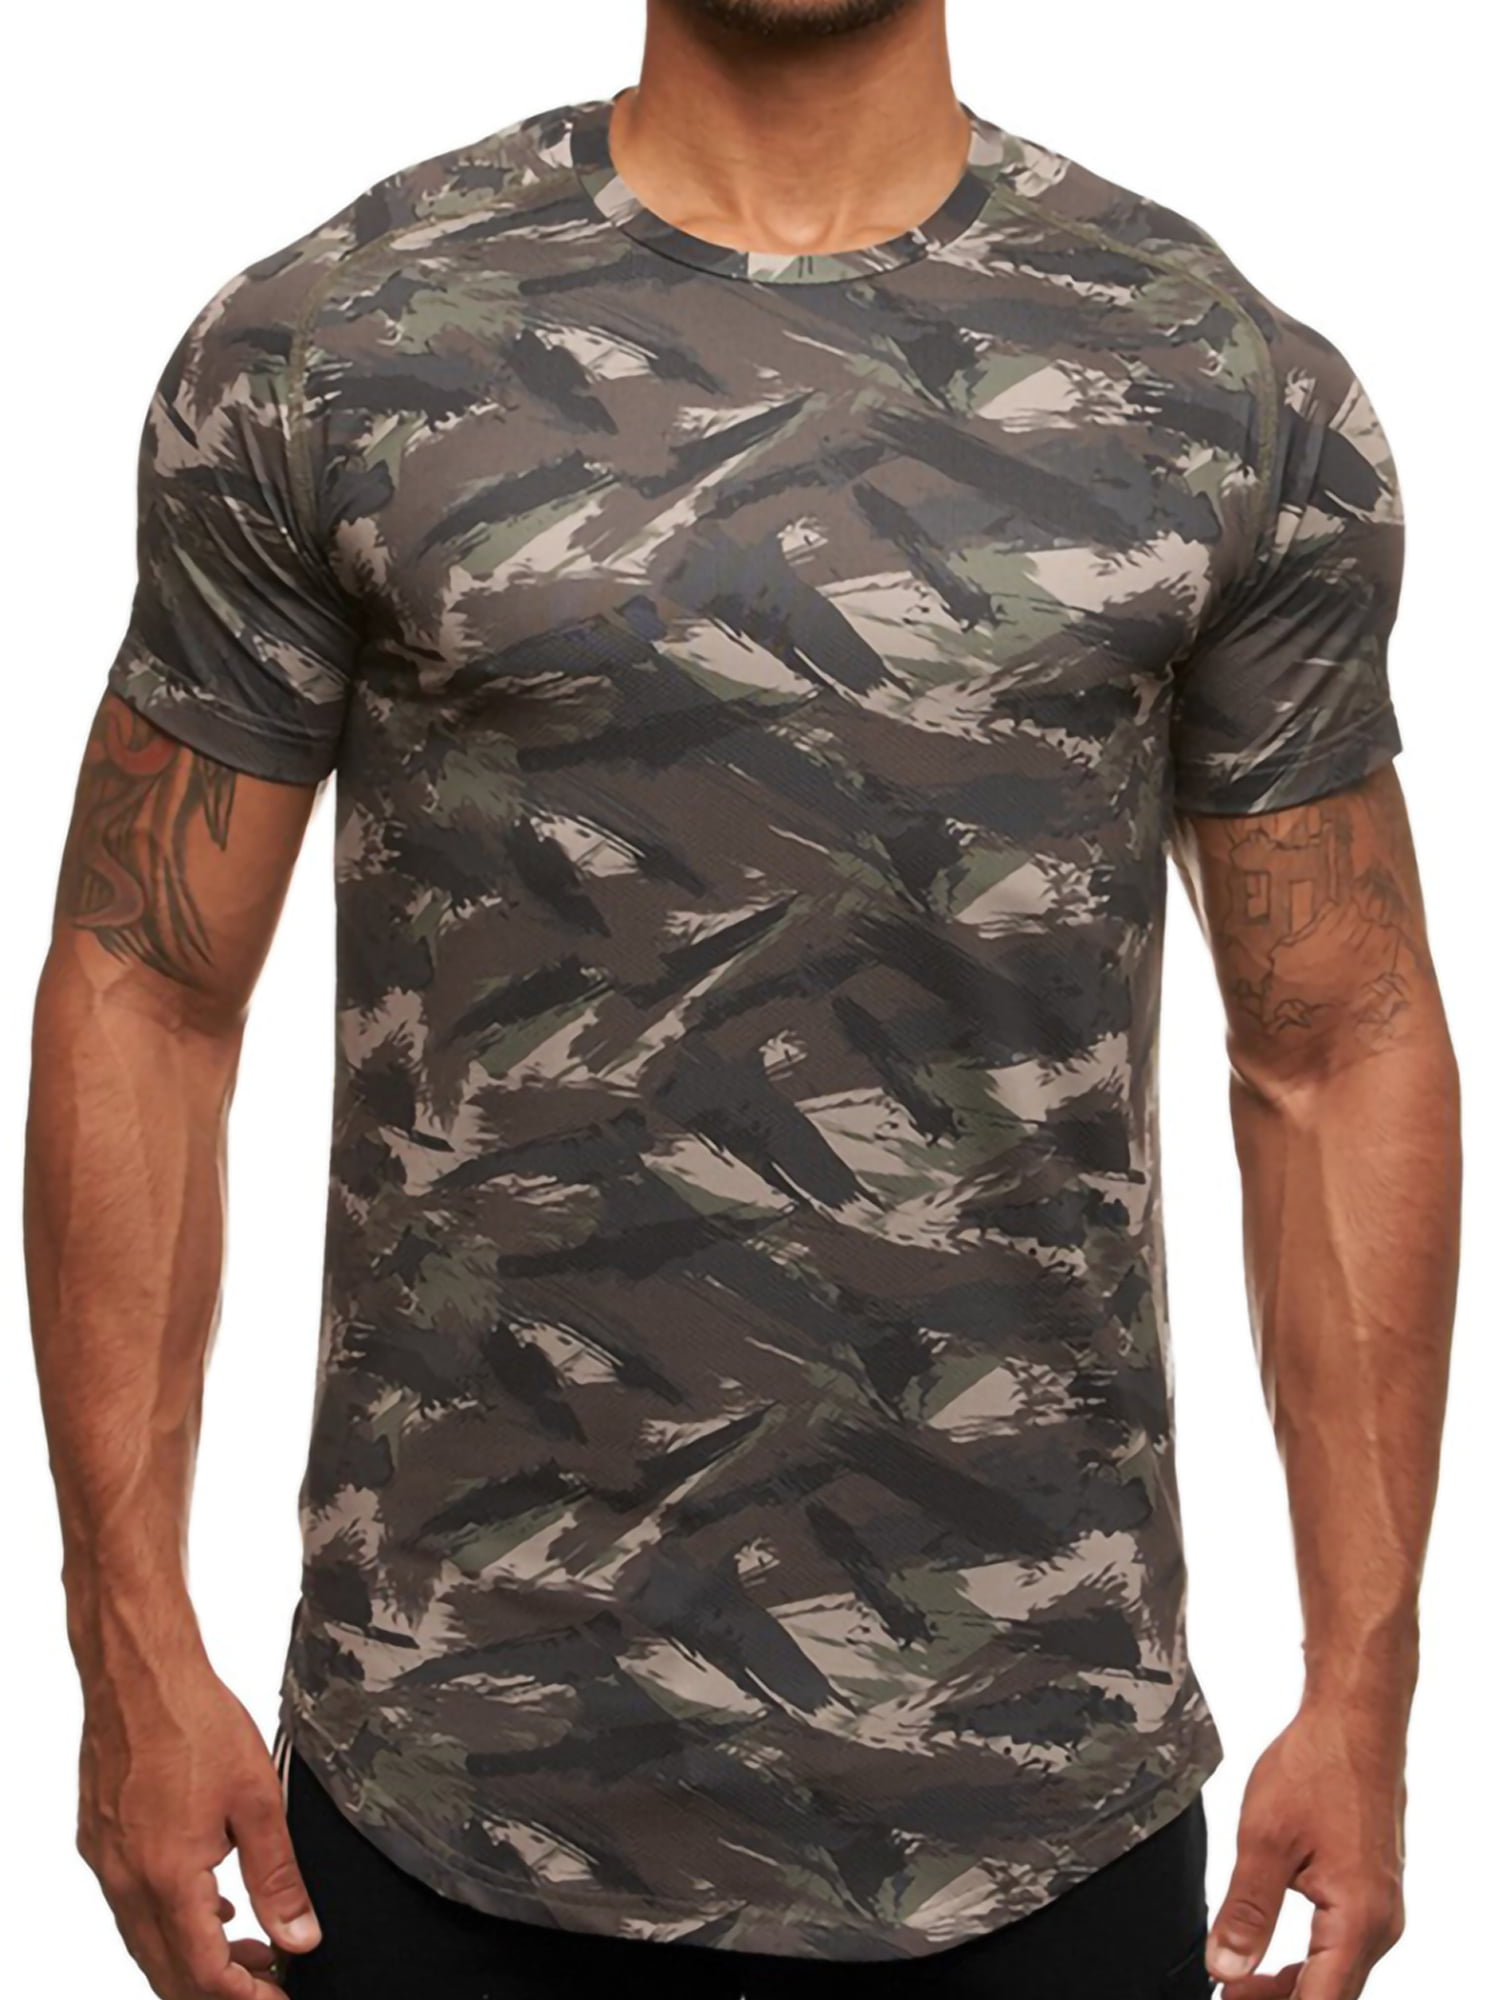 Mens Short Sleeve Shirt Camouflage Round Neck Casual T-shirt Tops Gym Tee Shirt 